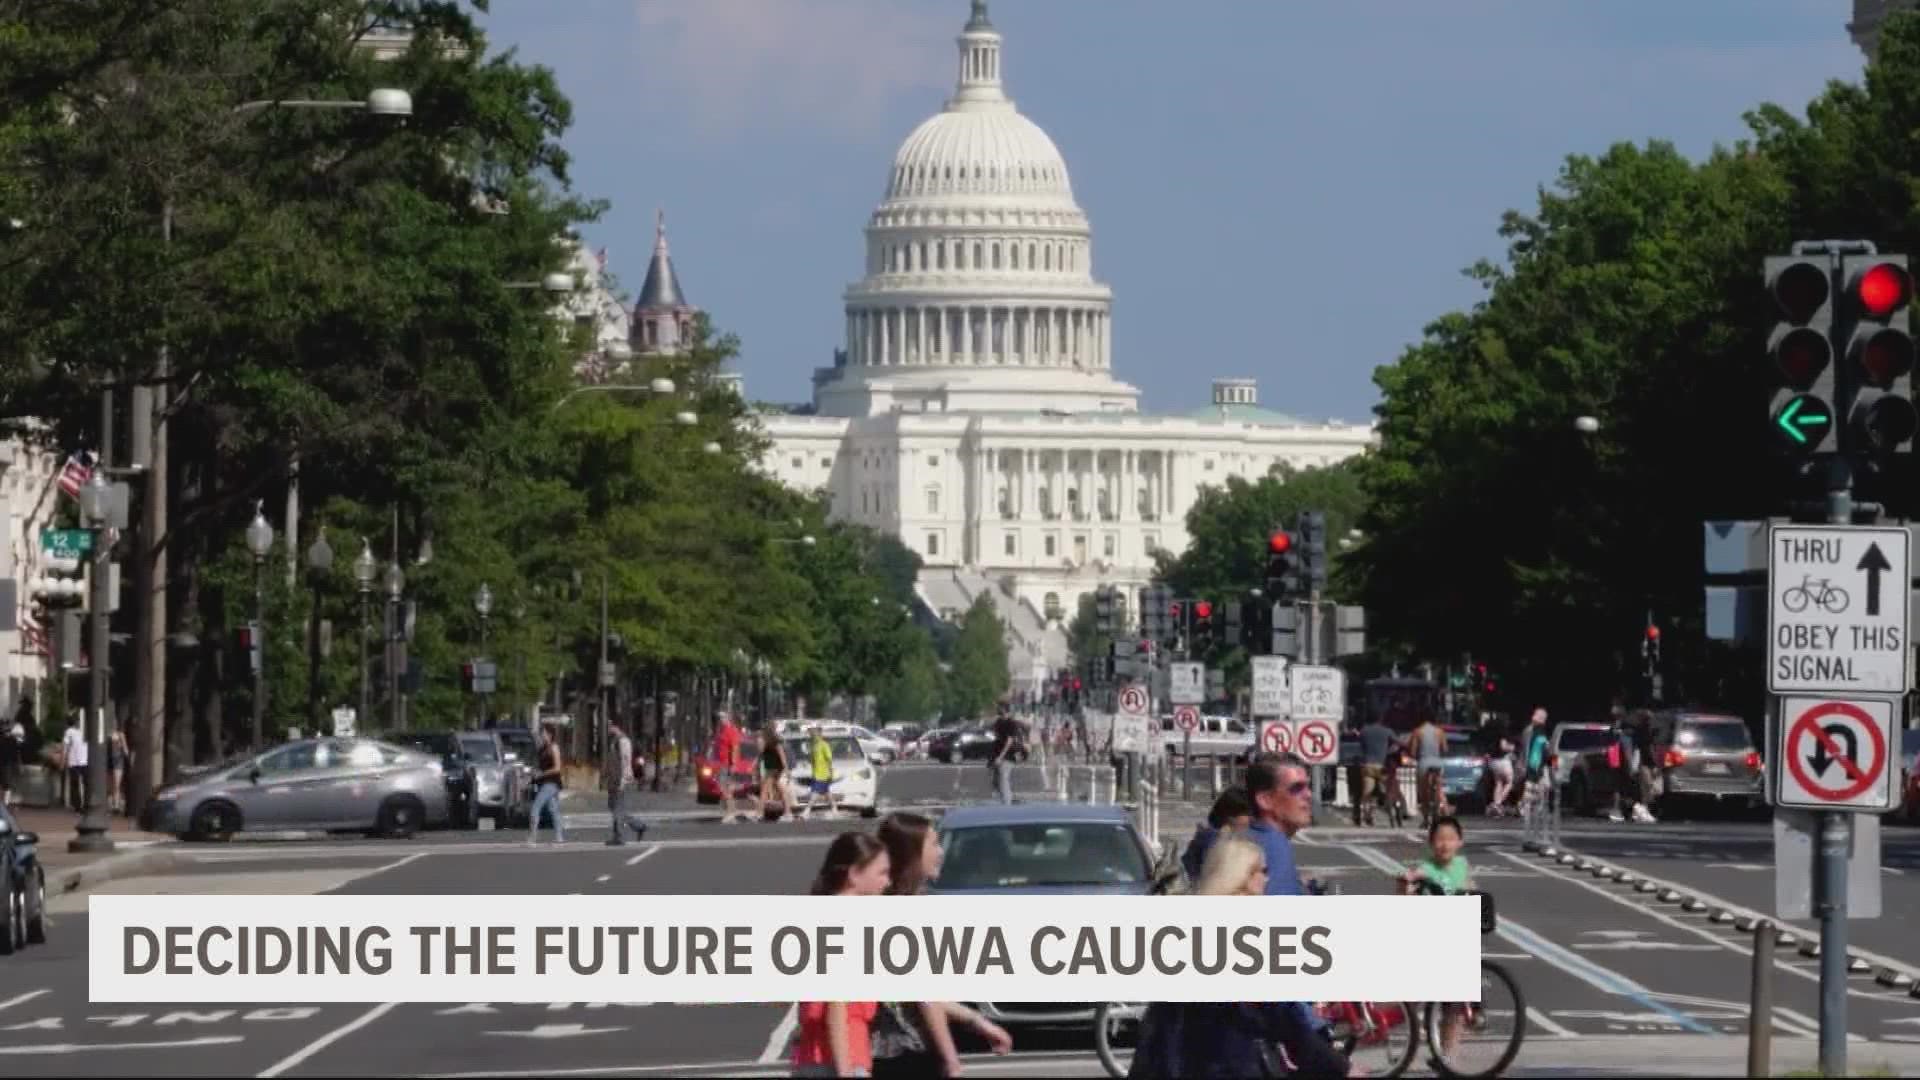 The DNC's Rules and Bylaws Committee will meet starting Dec. 1 to vote on a new nominating calendar which could strip Iowa of its first-in-the-nation title.